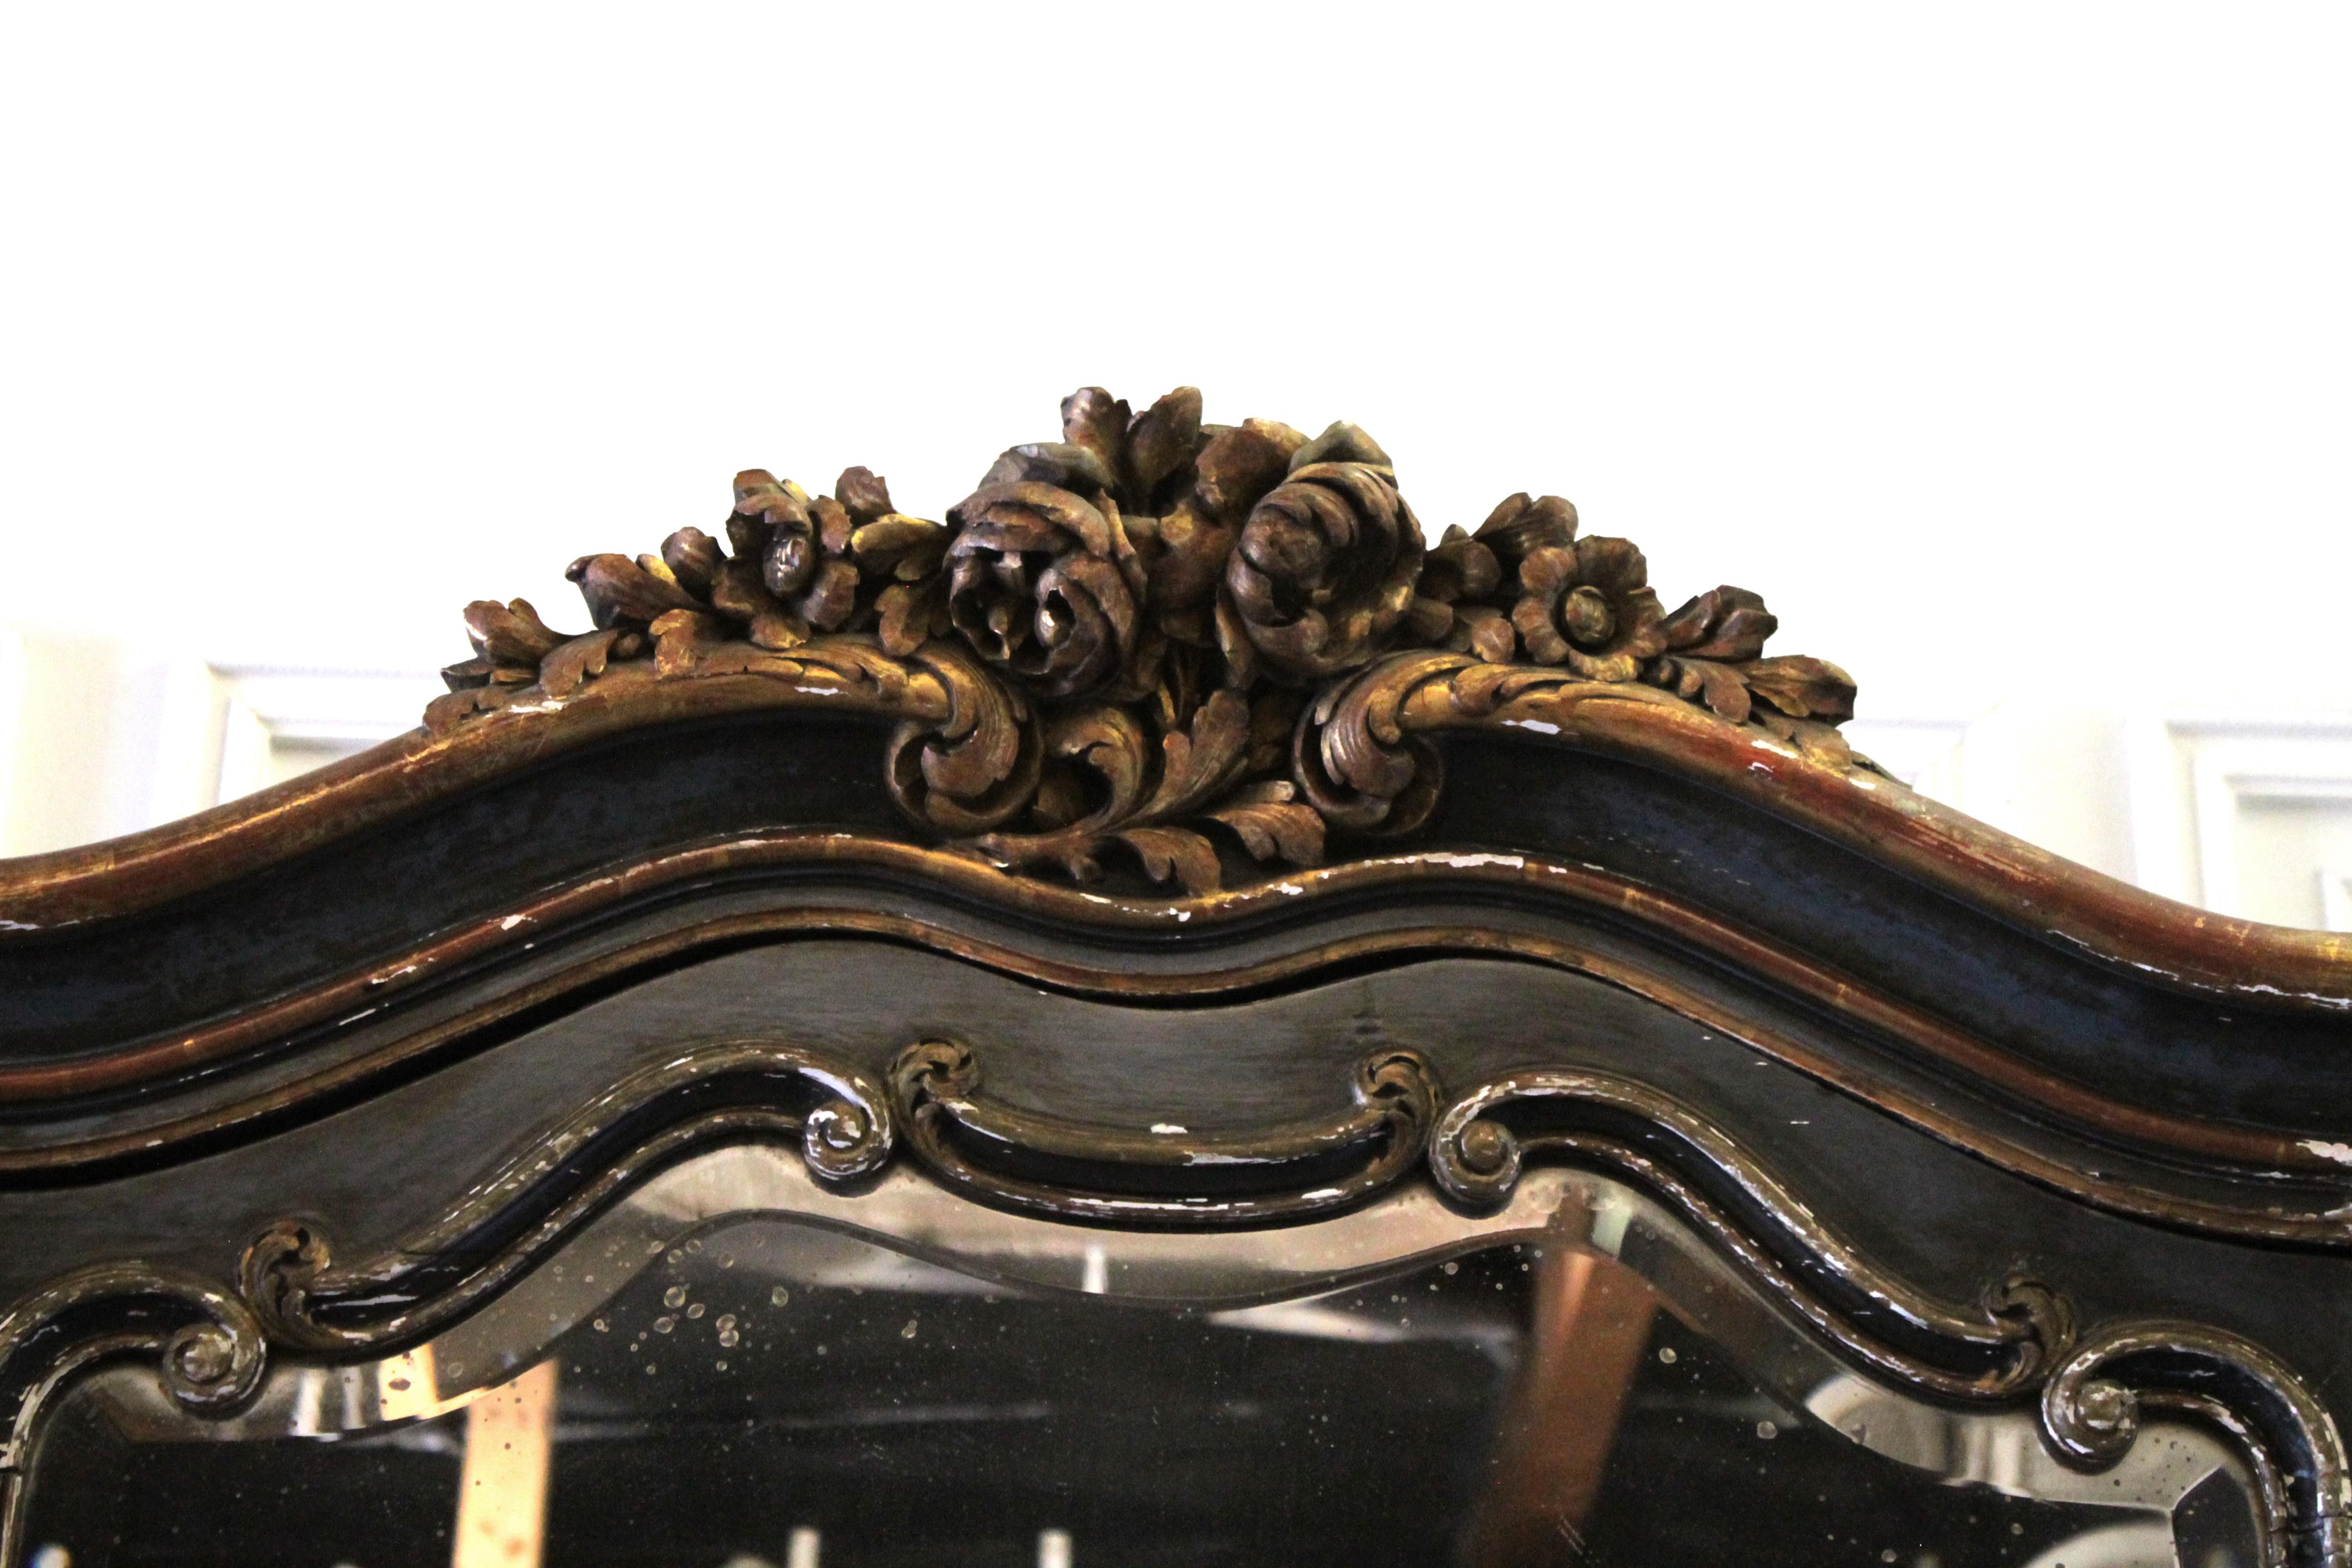 19th century Louis XV style French polychromed armoire
of demi-cartouche section; the arched and molded pediment carved with curling acanthus and roses; the single door inset with a nicely shaped and fully bevelled mirror. Rounded sides inset with